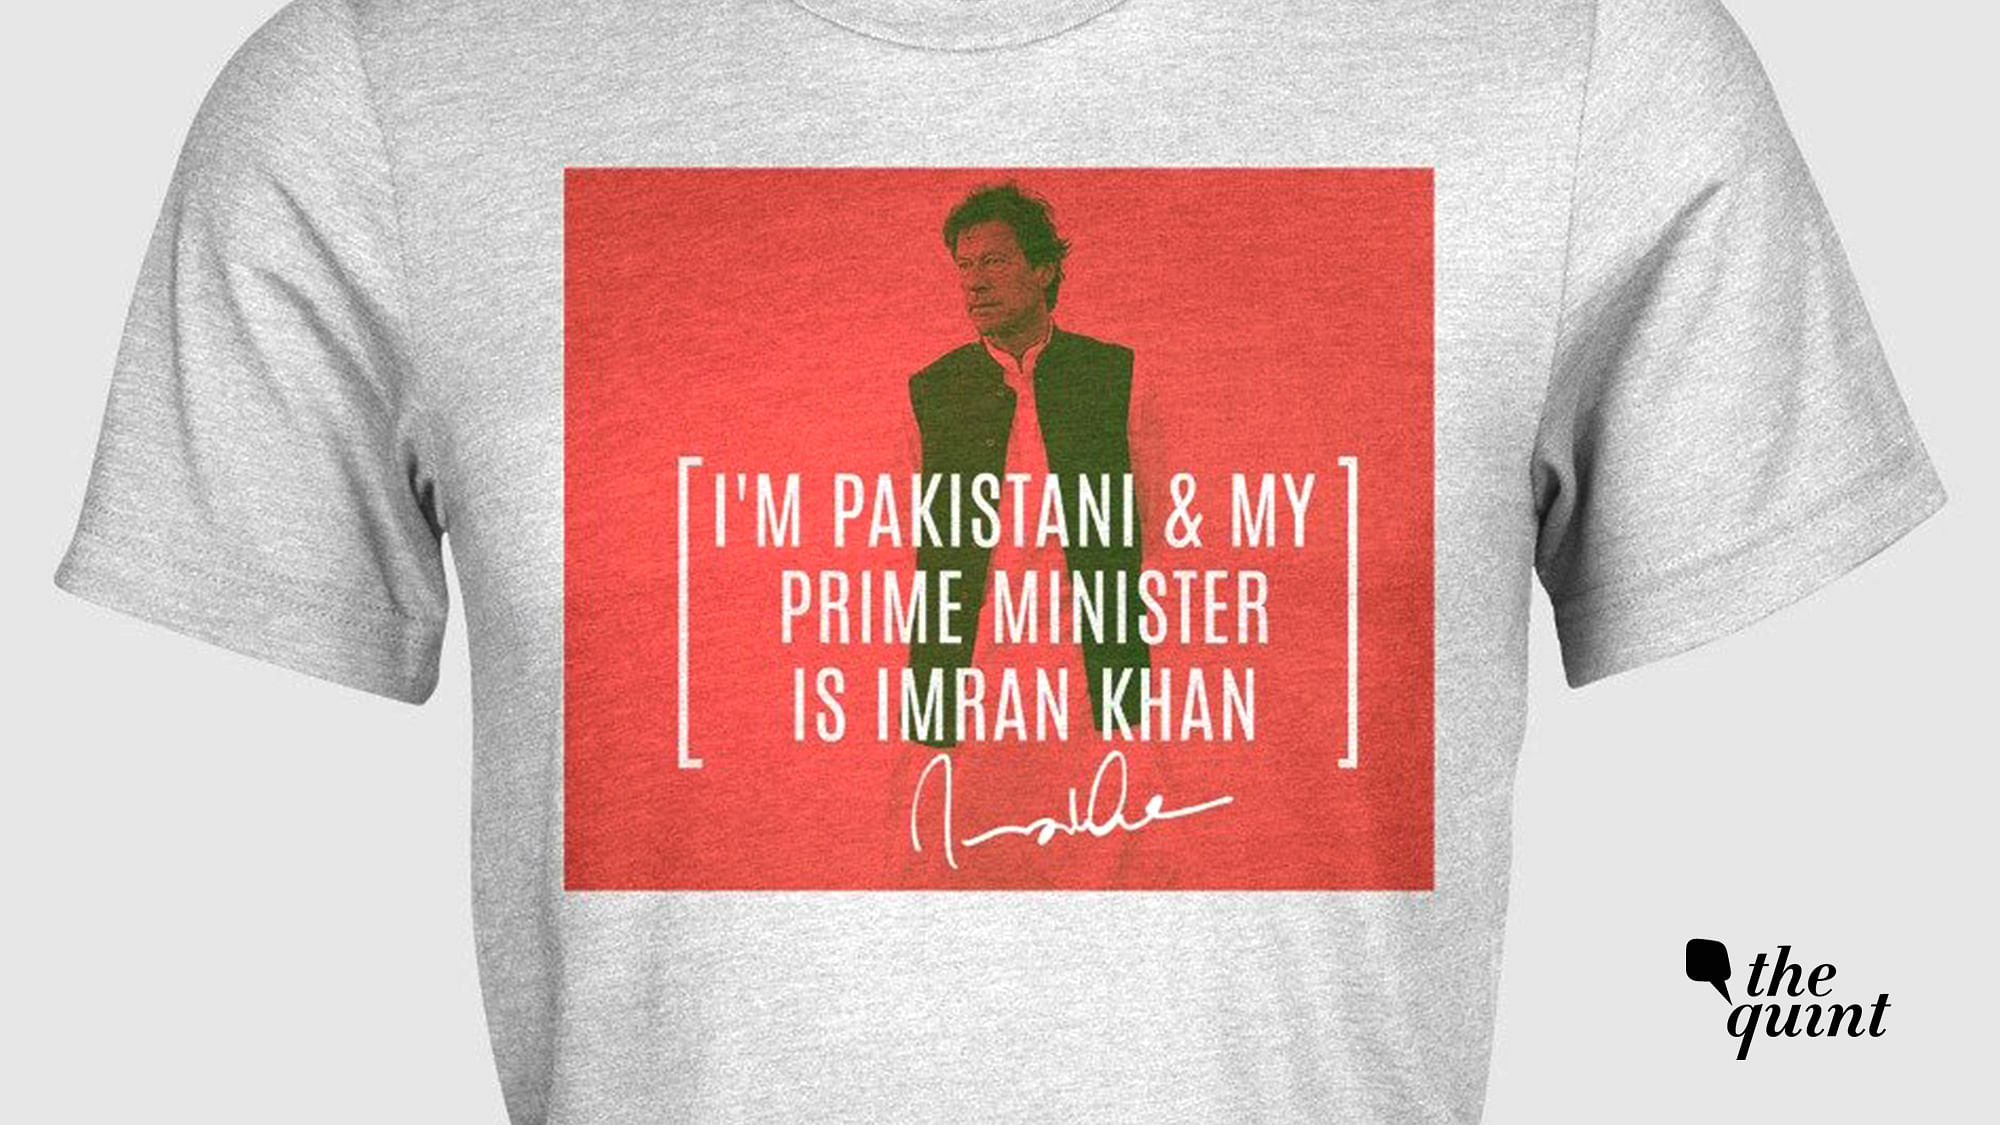 Imran Khan’s appeal can be decoded from this t-shirt sold at PTI’s official website. 